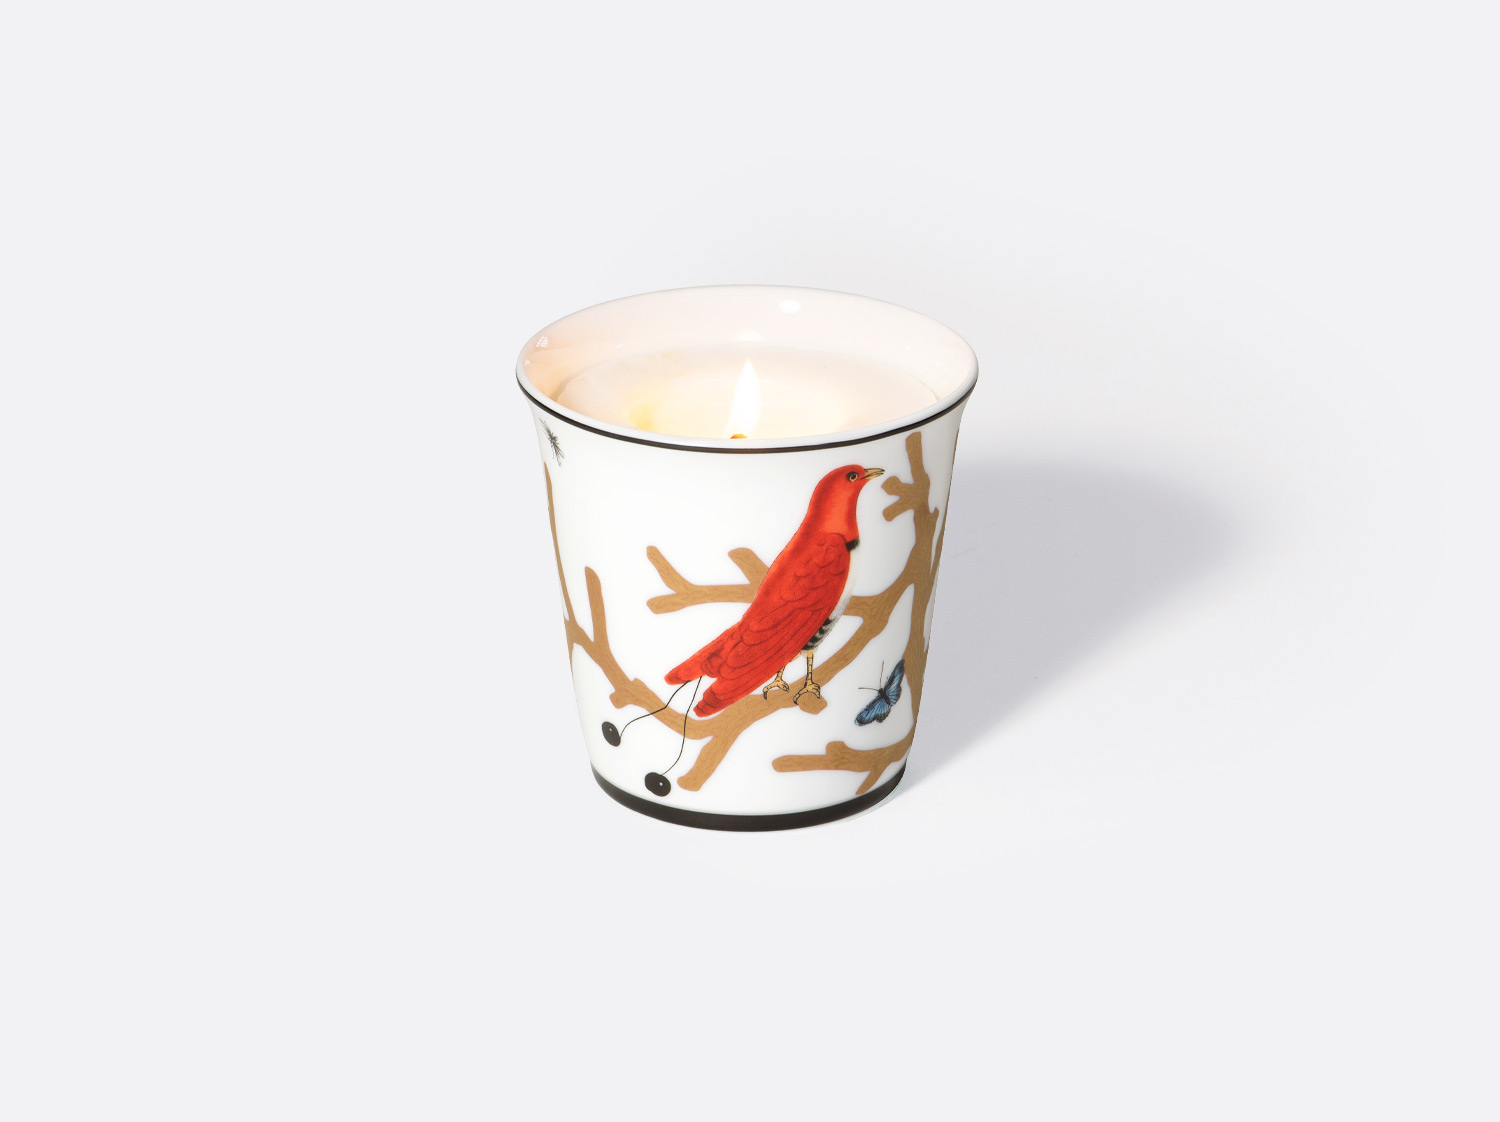 China Tumbler + candle home fragrance 200g of the collection Aux oiseaux - pot | Bernardaud